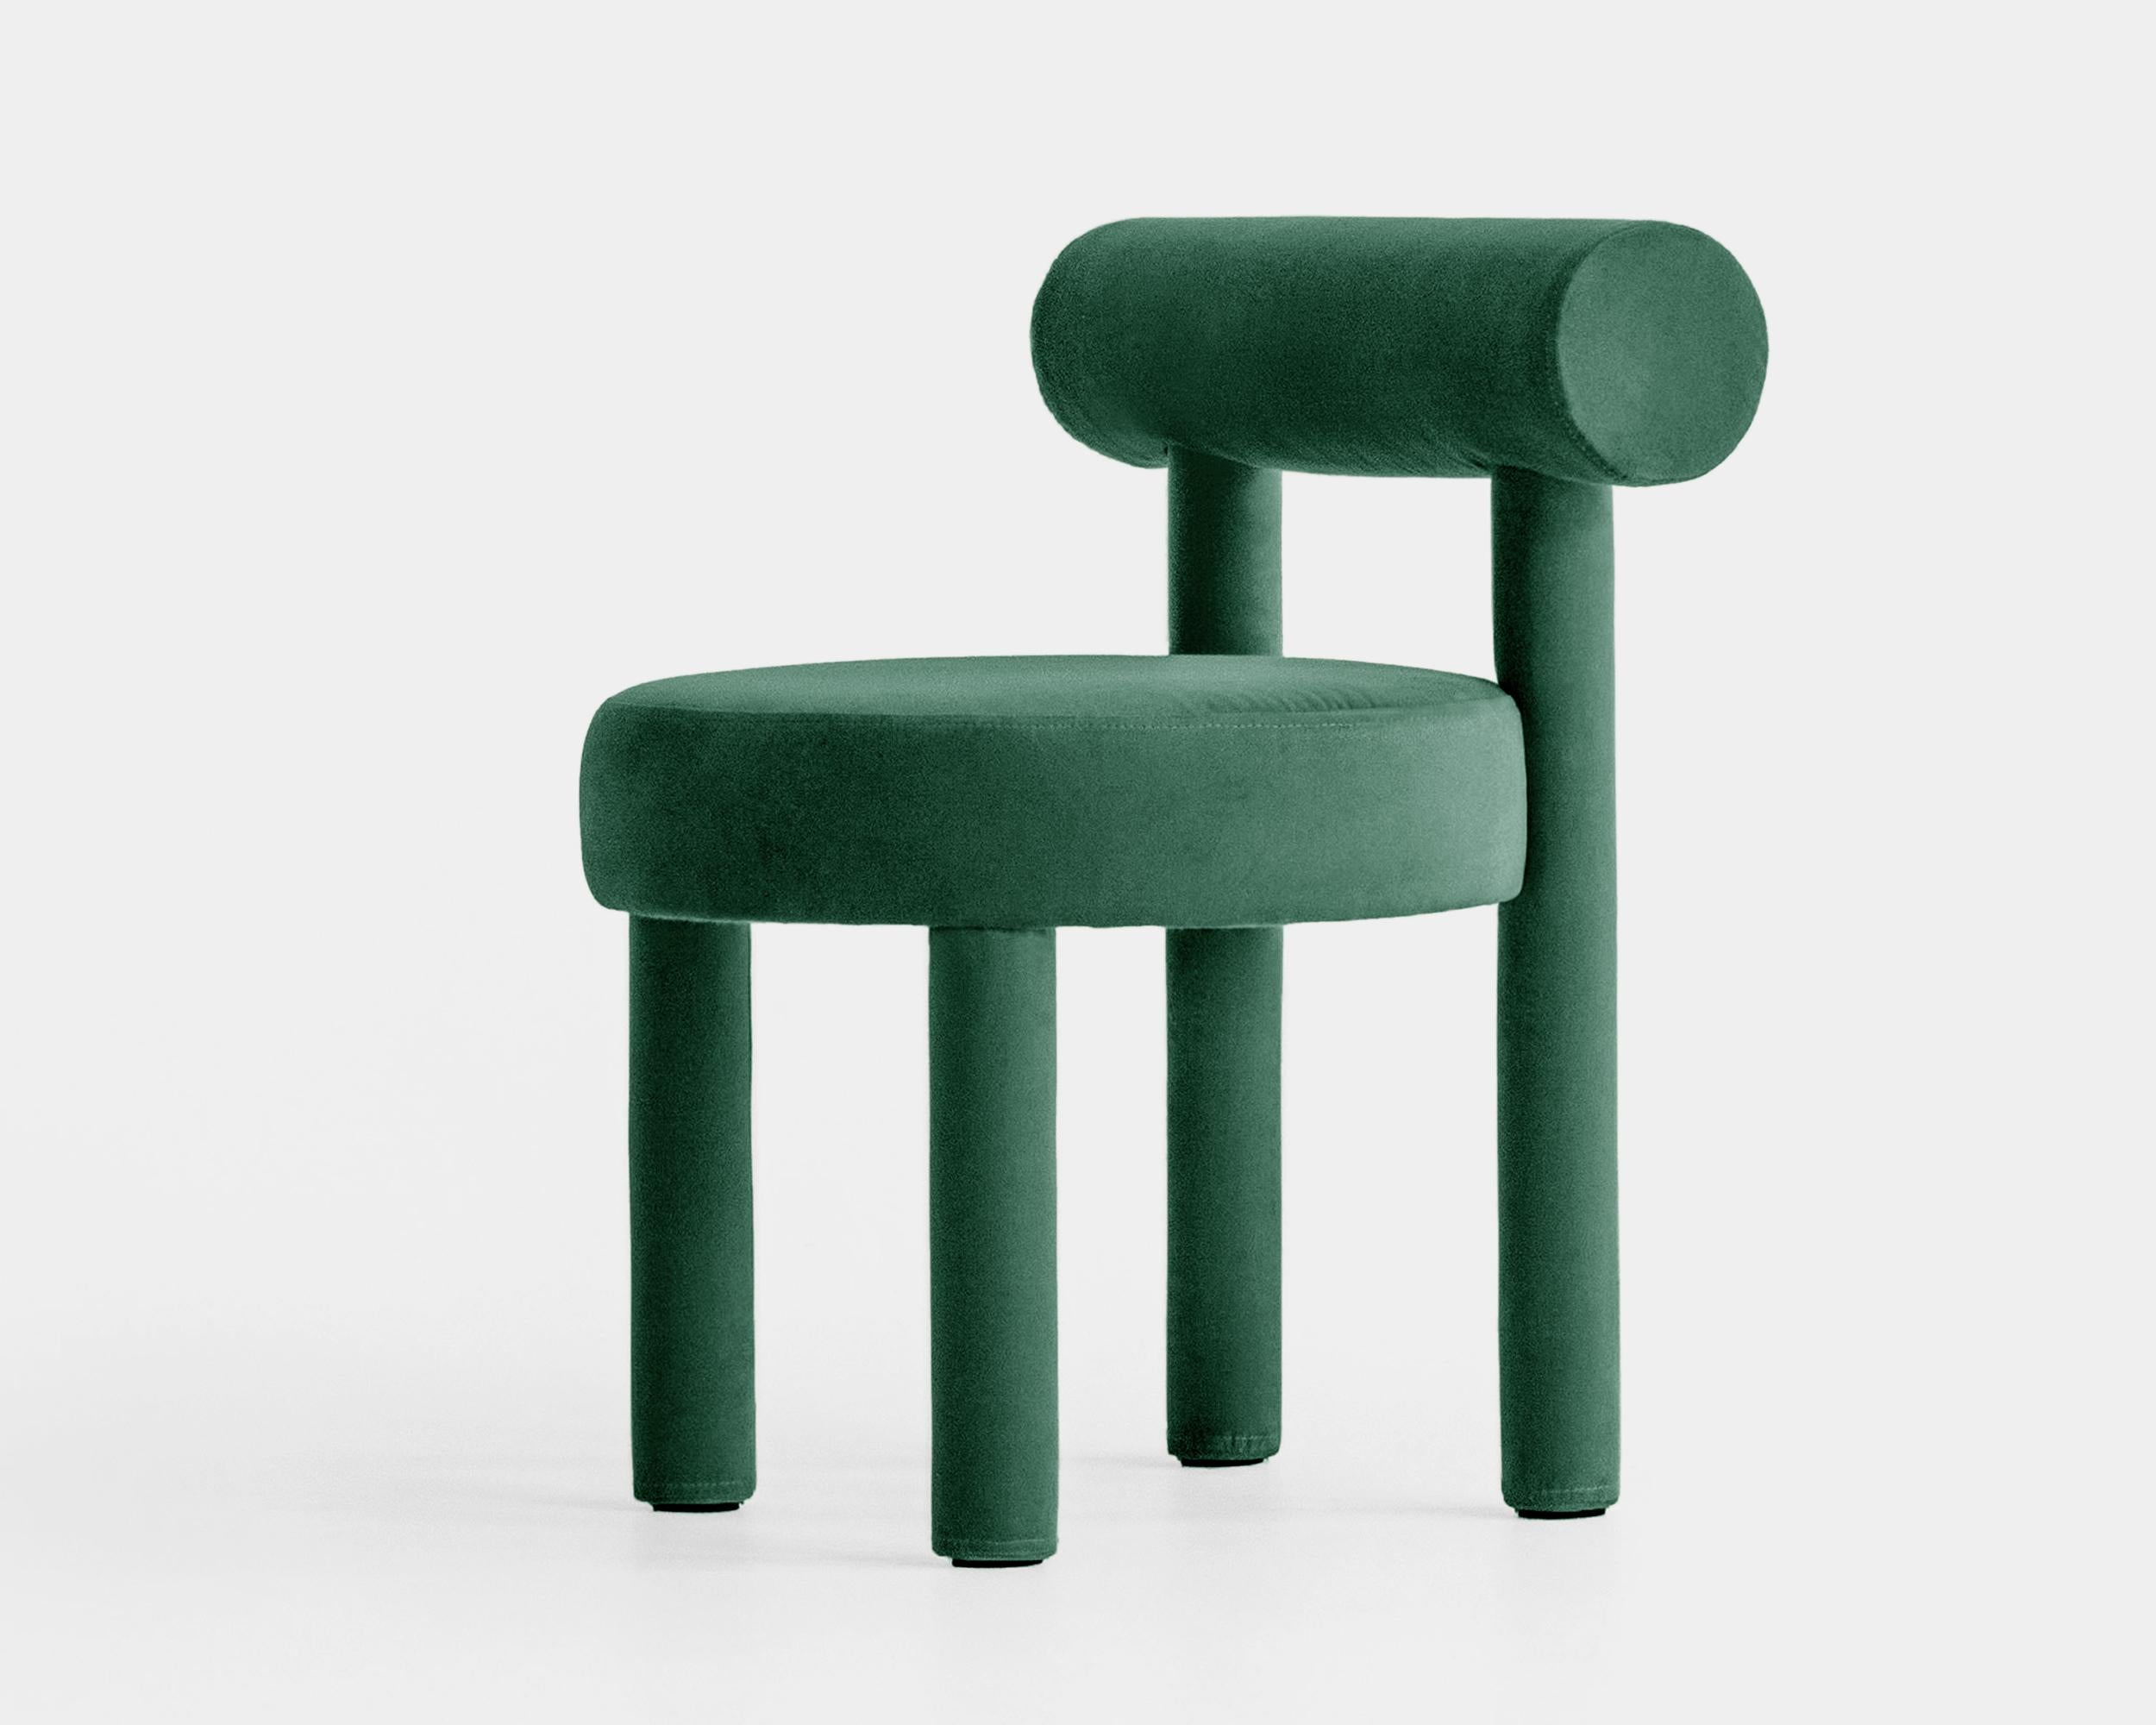 Chair Gropius CS1
Designer: Kateryna Sokolova

Model in the main picture : Collection - Magic velvet, Color - Green 2225

Dimensions:
Height: 74 cm / 29,13 in
Width: 57 cm / 22,44 in
Depth: 57 cm / 22,44 in
Seat height: 47 cm / 18,11 in

New NOOM